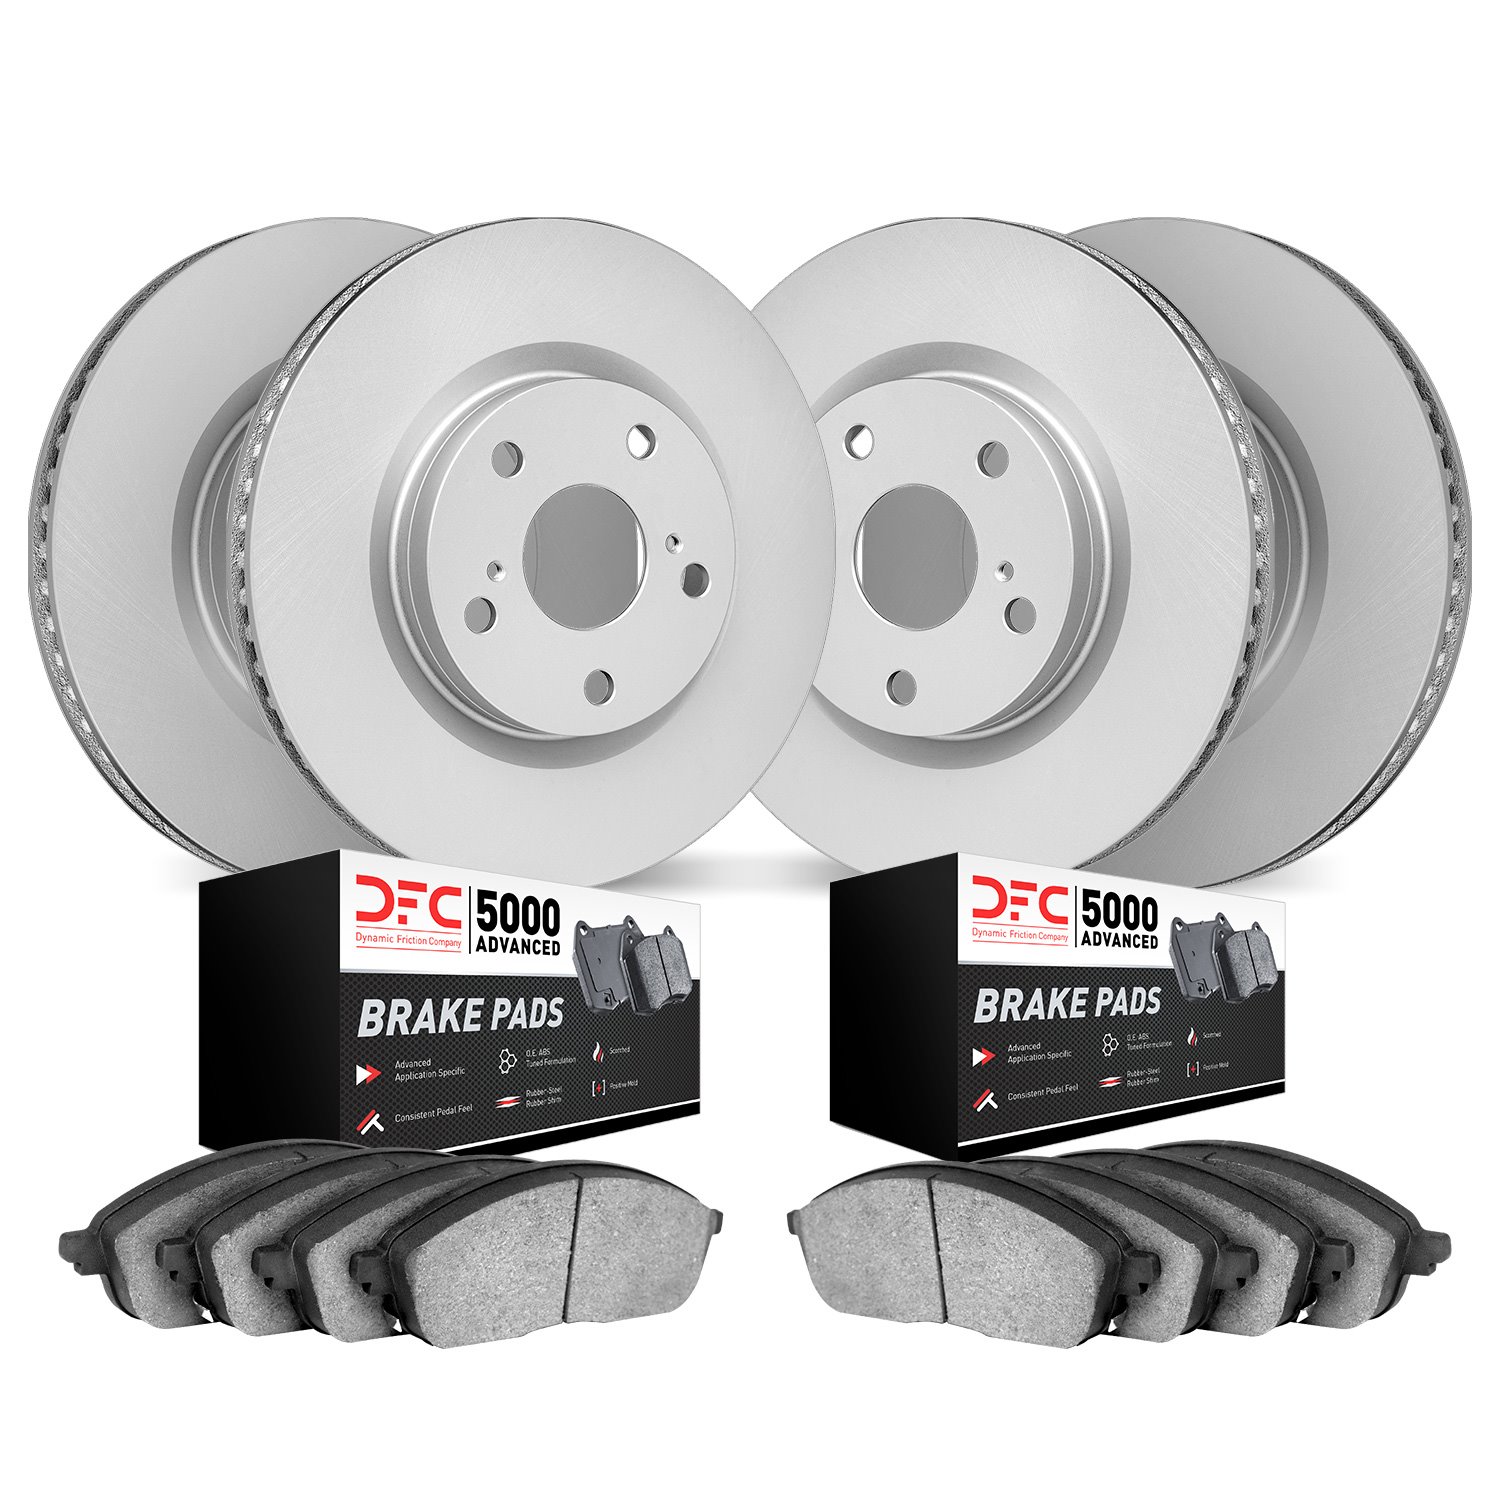 4504-63084 Geospec Brake Rotors w/5000 Advanced Brake Pads Kit, 2003-2006 Mercedes-Benz, Position: Front and Rear